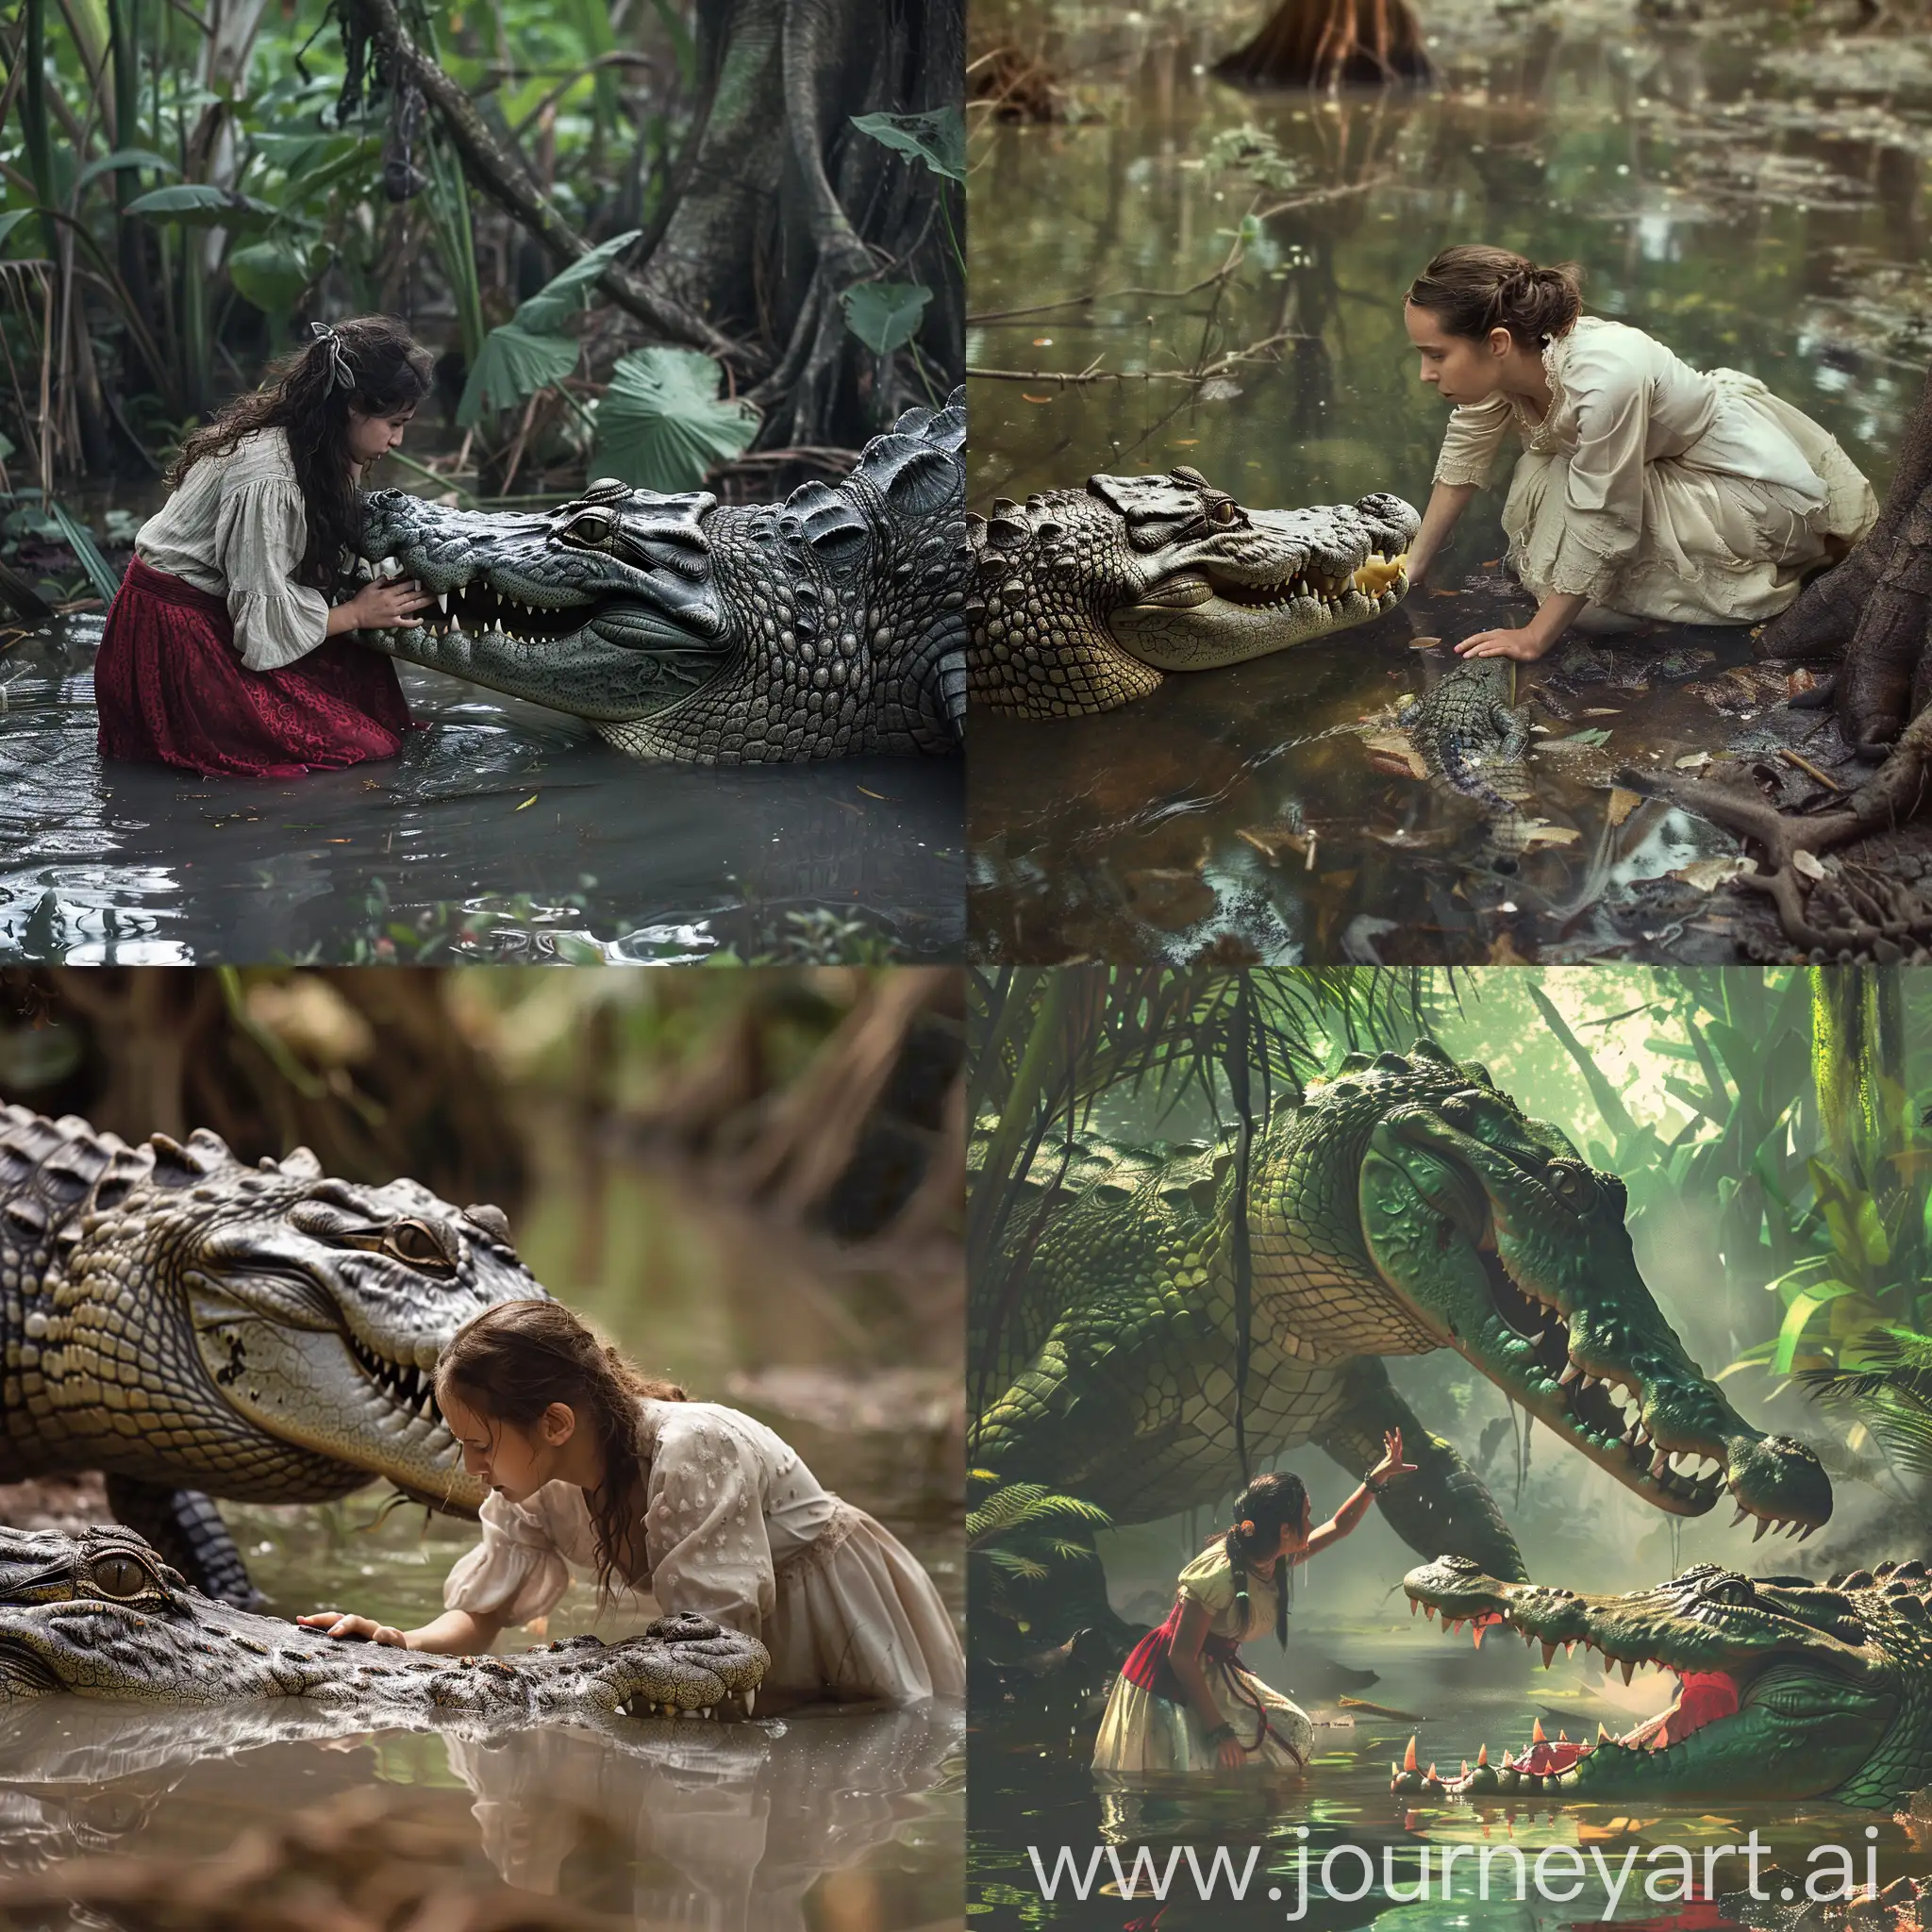 Courageous-Spanish-Maiden-Confronts-Giant-Crocodile-in-Swamp